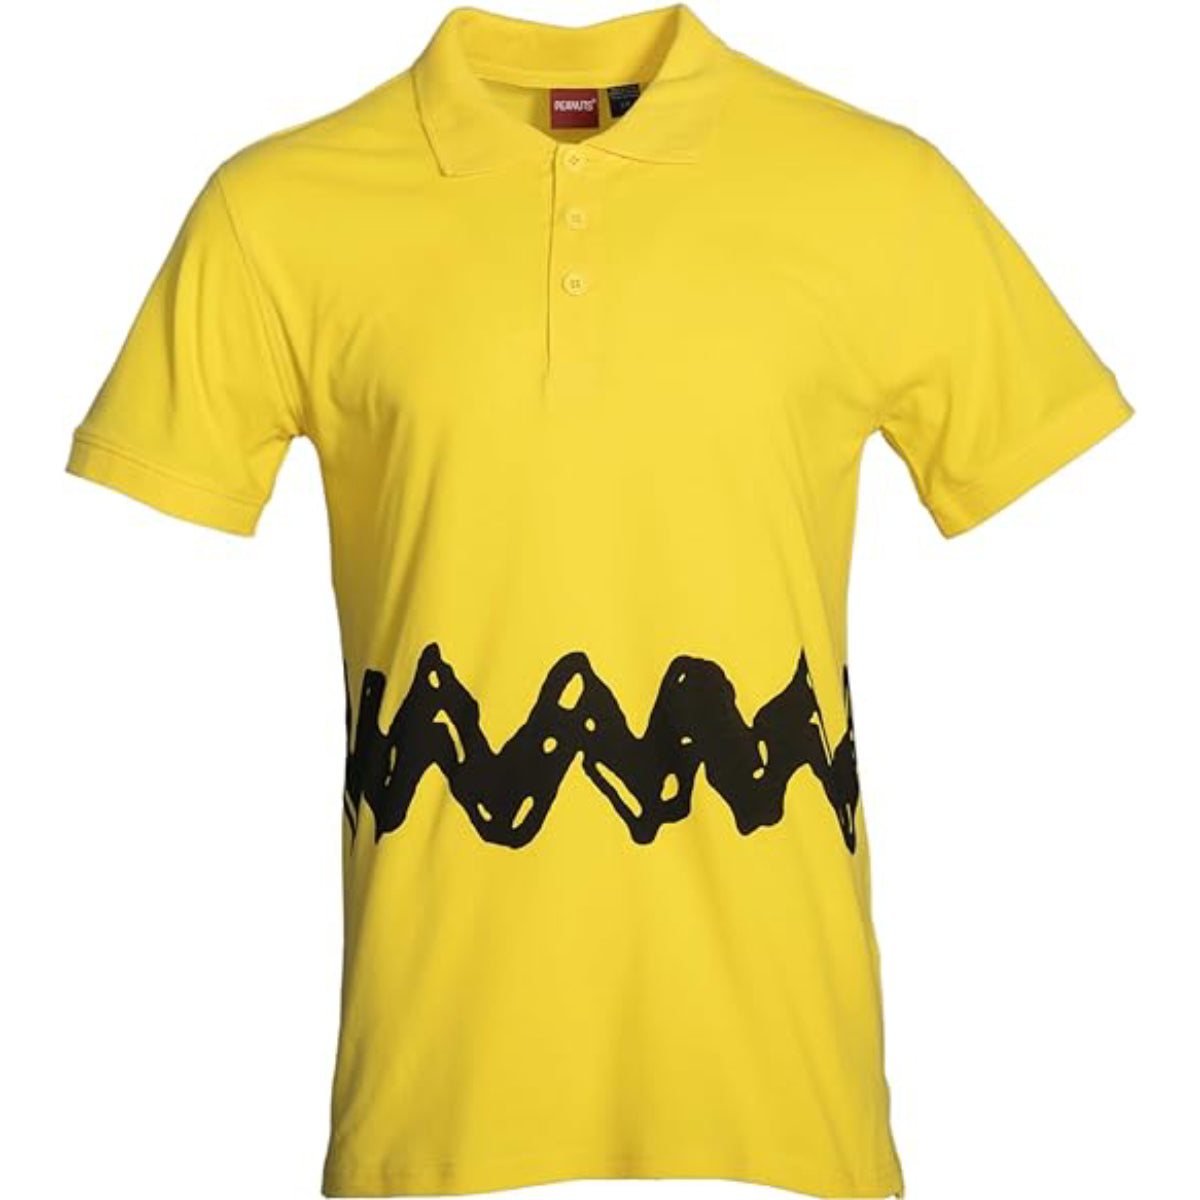 Charlie Brown Costume Essentials for Toddlers Zig Zag Shirt and I Am Charlie Brown Polo